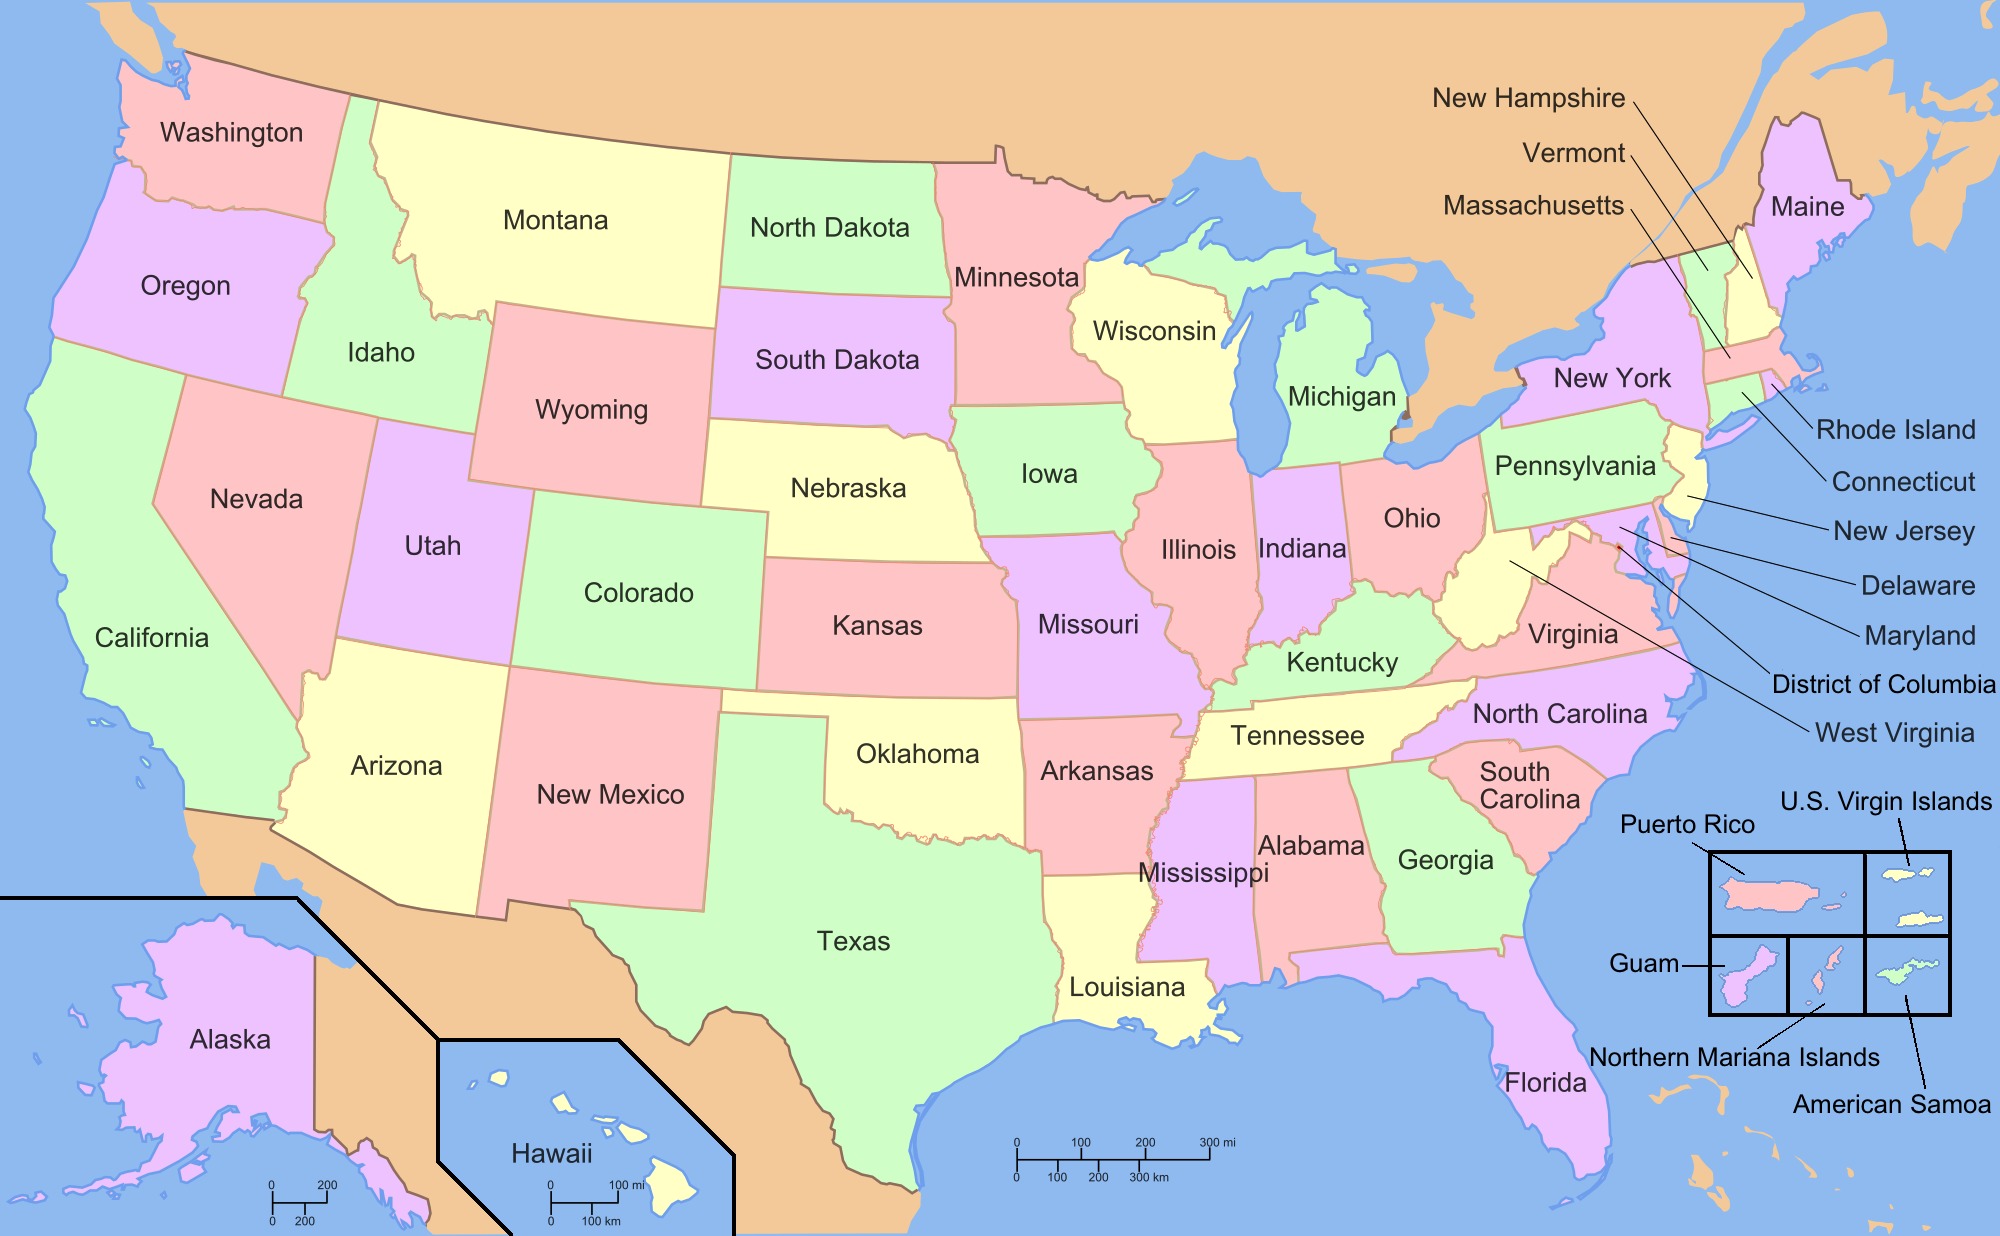 27 US states are actually farther north than the southernmost point of Canada